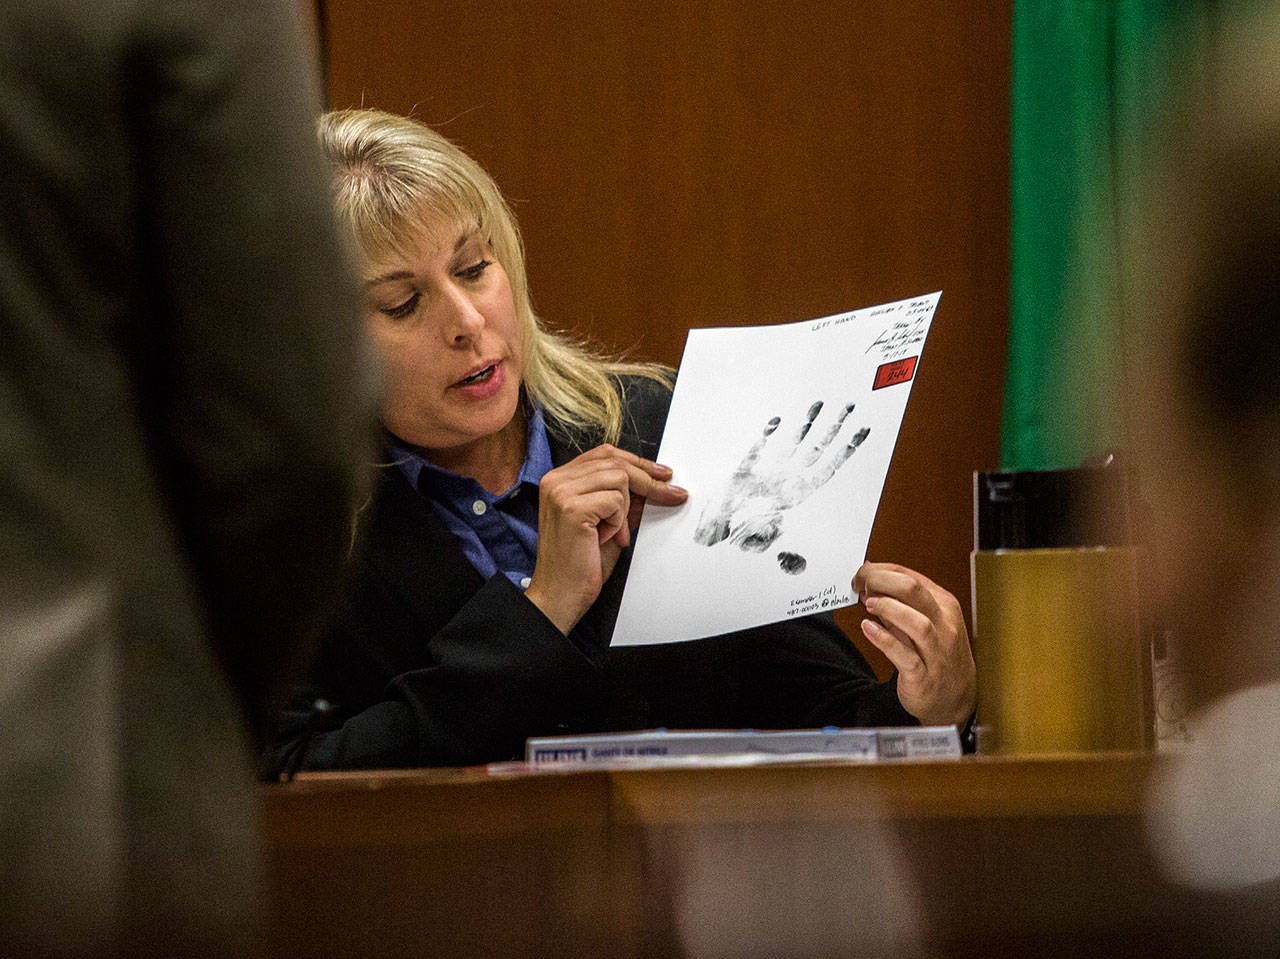 Washington State Patrol forensic scientist Angela Hilliard shows and talks about a palm print of William Talbot II during the trial at the Snohomish County Courthouse on Tuesday in Everett. (Olivia Vanni / The Herald)